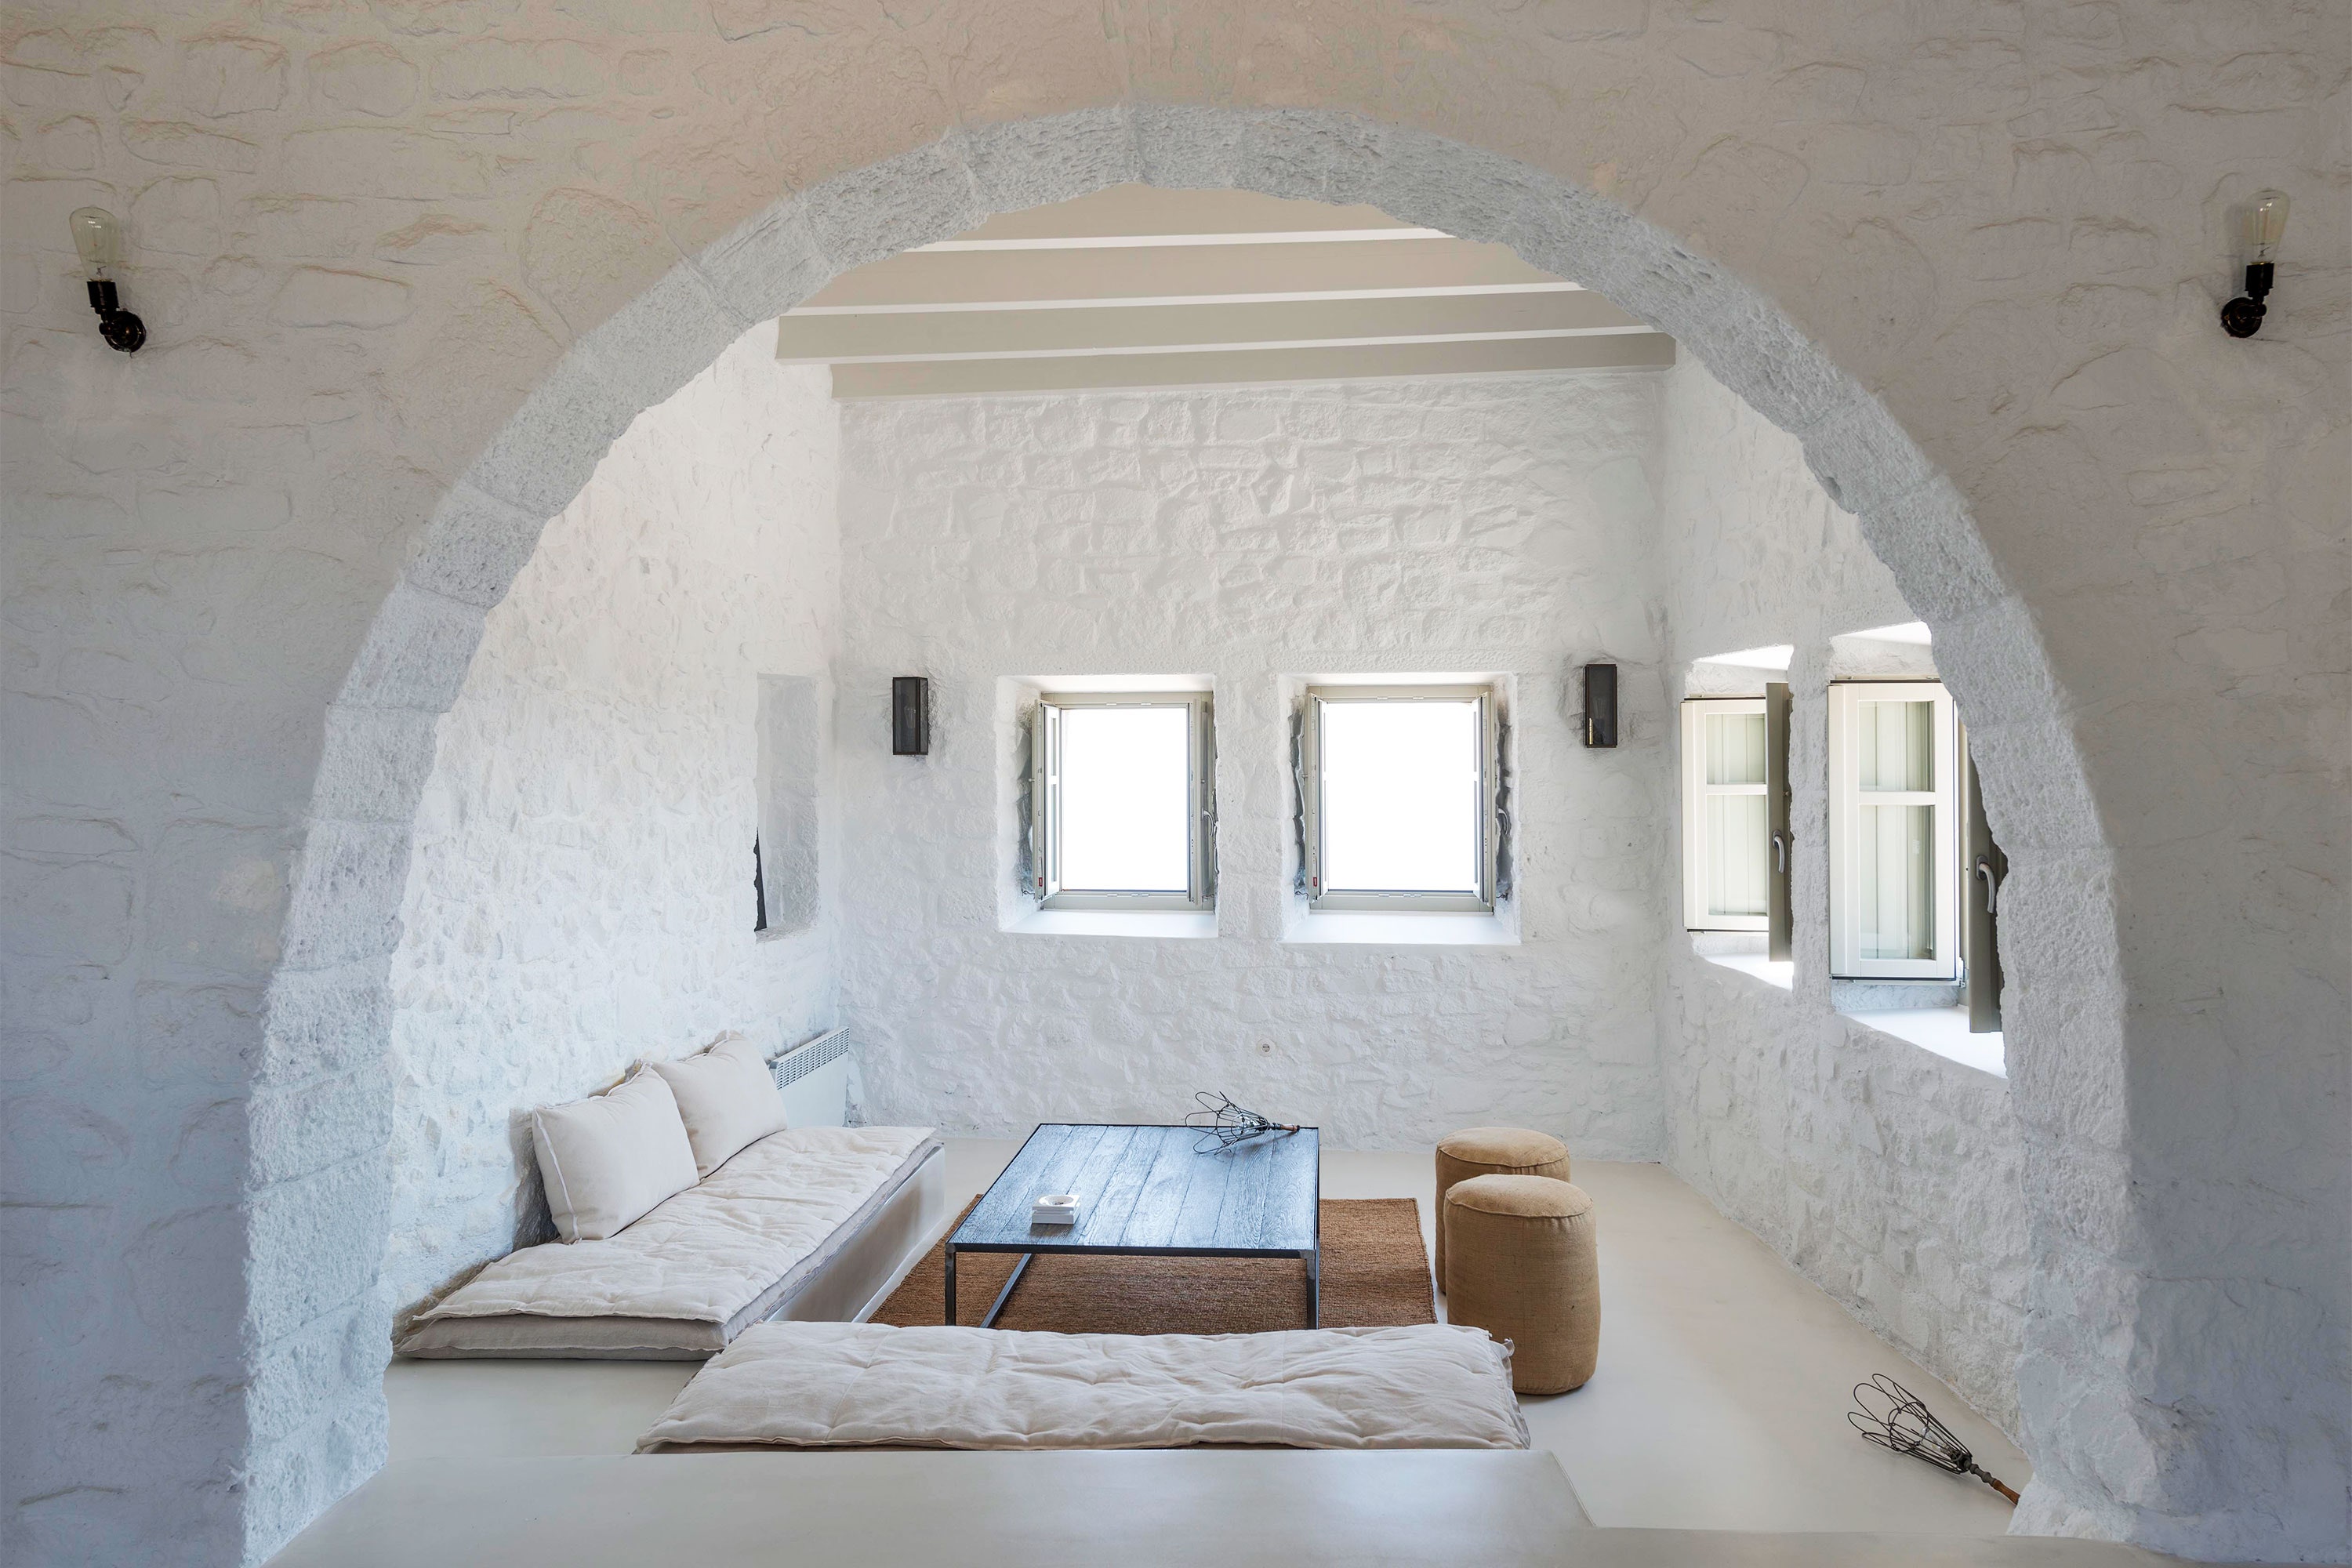 <p><strong>Nisyros, Dodecanese Islands</strong></p> <p>The 17th-century Sterna tower was meticulously restored by local architect Giorgos Tsironis using traditional material and methods. Whitewashed walls carved out of volcanic stone sweep through the open-plan spaces, revealing sunken sitting areas framed by arches, and a couple of cool, crumpled linen bedrooms. The upstairs terrace has one of the most extraordinary views on the little island of Nisyros, looking out as far as Bodrum on the Turkish Riviera.</p> <p><strong>Sleeps:</strong> 4 to 6<br> <strong>Price:</strong> From about $1,964 per week</p> <div class="callout"><p><a href="https://cna.st/affiliate-link/7EaqjGTiGVEZLzw7dtDbaNV19tv3GB292XQUmXXjBeZmXJw4YG2Bg8vEz9PqTk1FA6TSJsjN5dChbJ7BCN9vidpaUyb6Lci1AHPiL6didhLoKhDuAsJZeusPZLF6hxaSgUNnLW4WmgnJERoJkhAmN" rel="sponsored" title="Book now at Hipaway Villas">Book now at Hipaway Villas</a></p> </div><p>Sign up to receive the latest news, expert tips, and inspiration on all things travel.</p><a href="https://www.cntraveler.com/newsletter/the-daily?sourceCode=msnsend">Inspire Me</a>